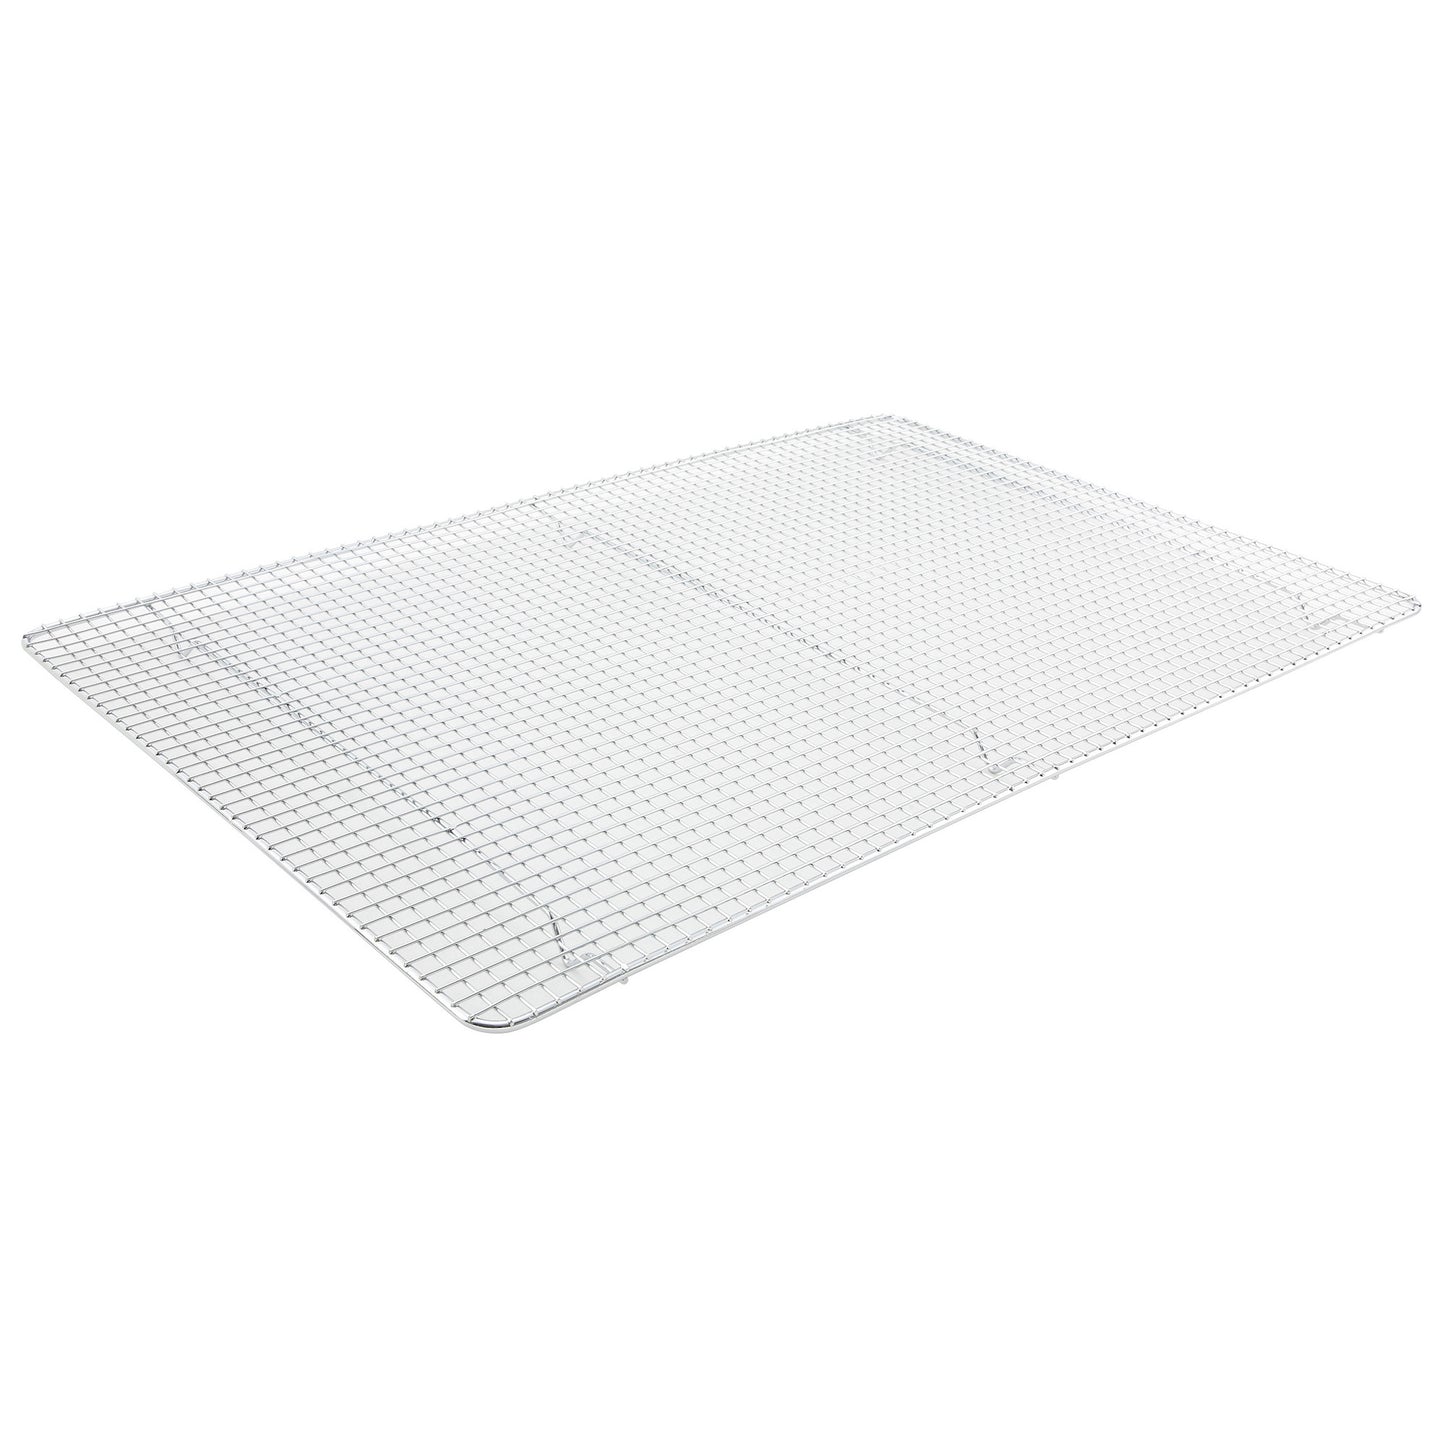 PGW-2416 - Wire Sheet Pan Grate, Chrome-Plated - Full